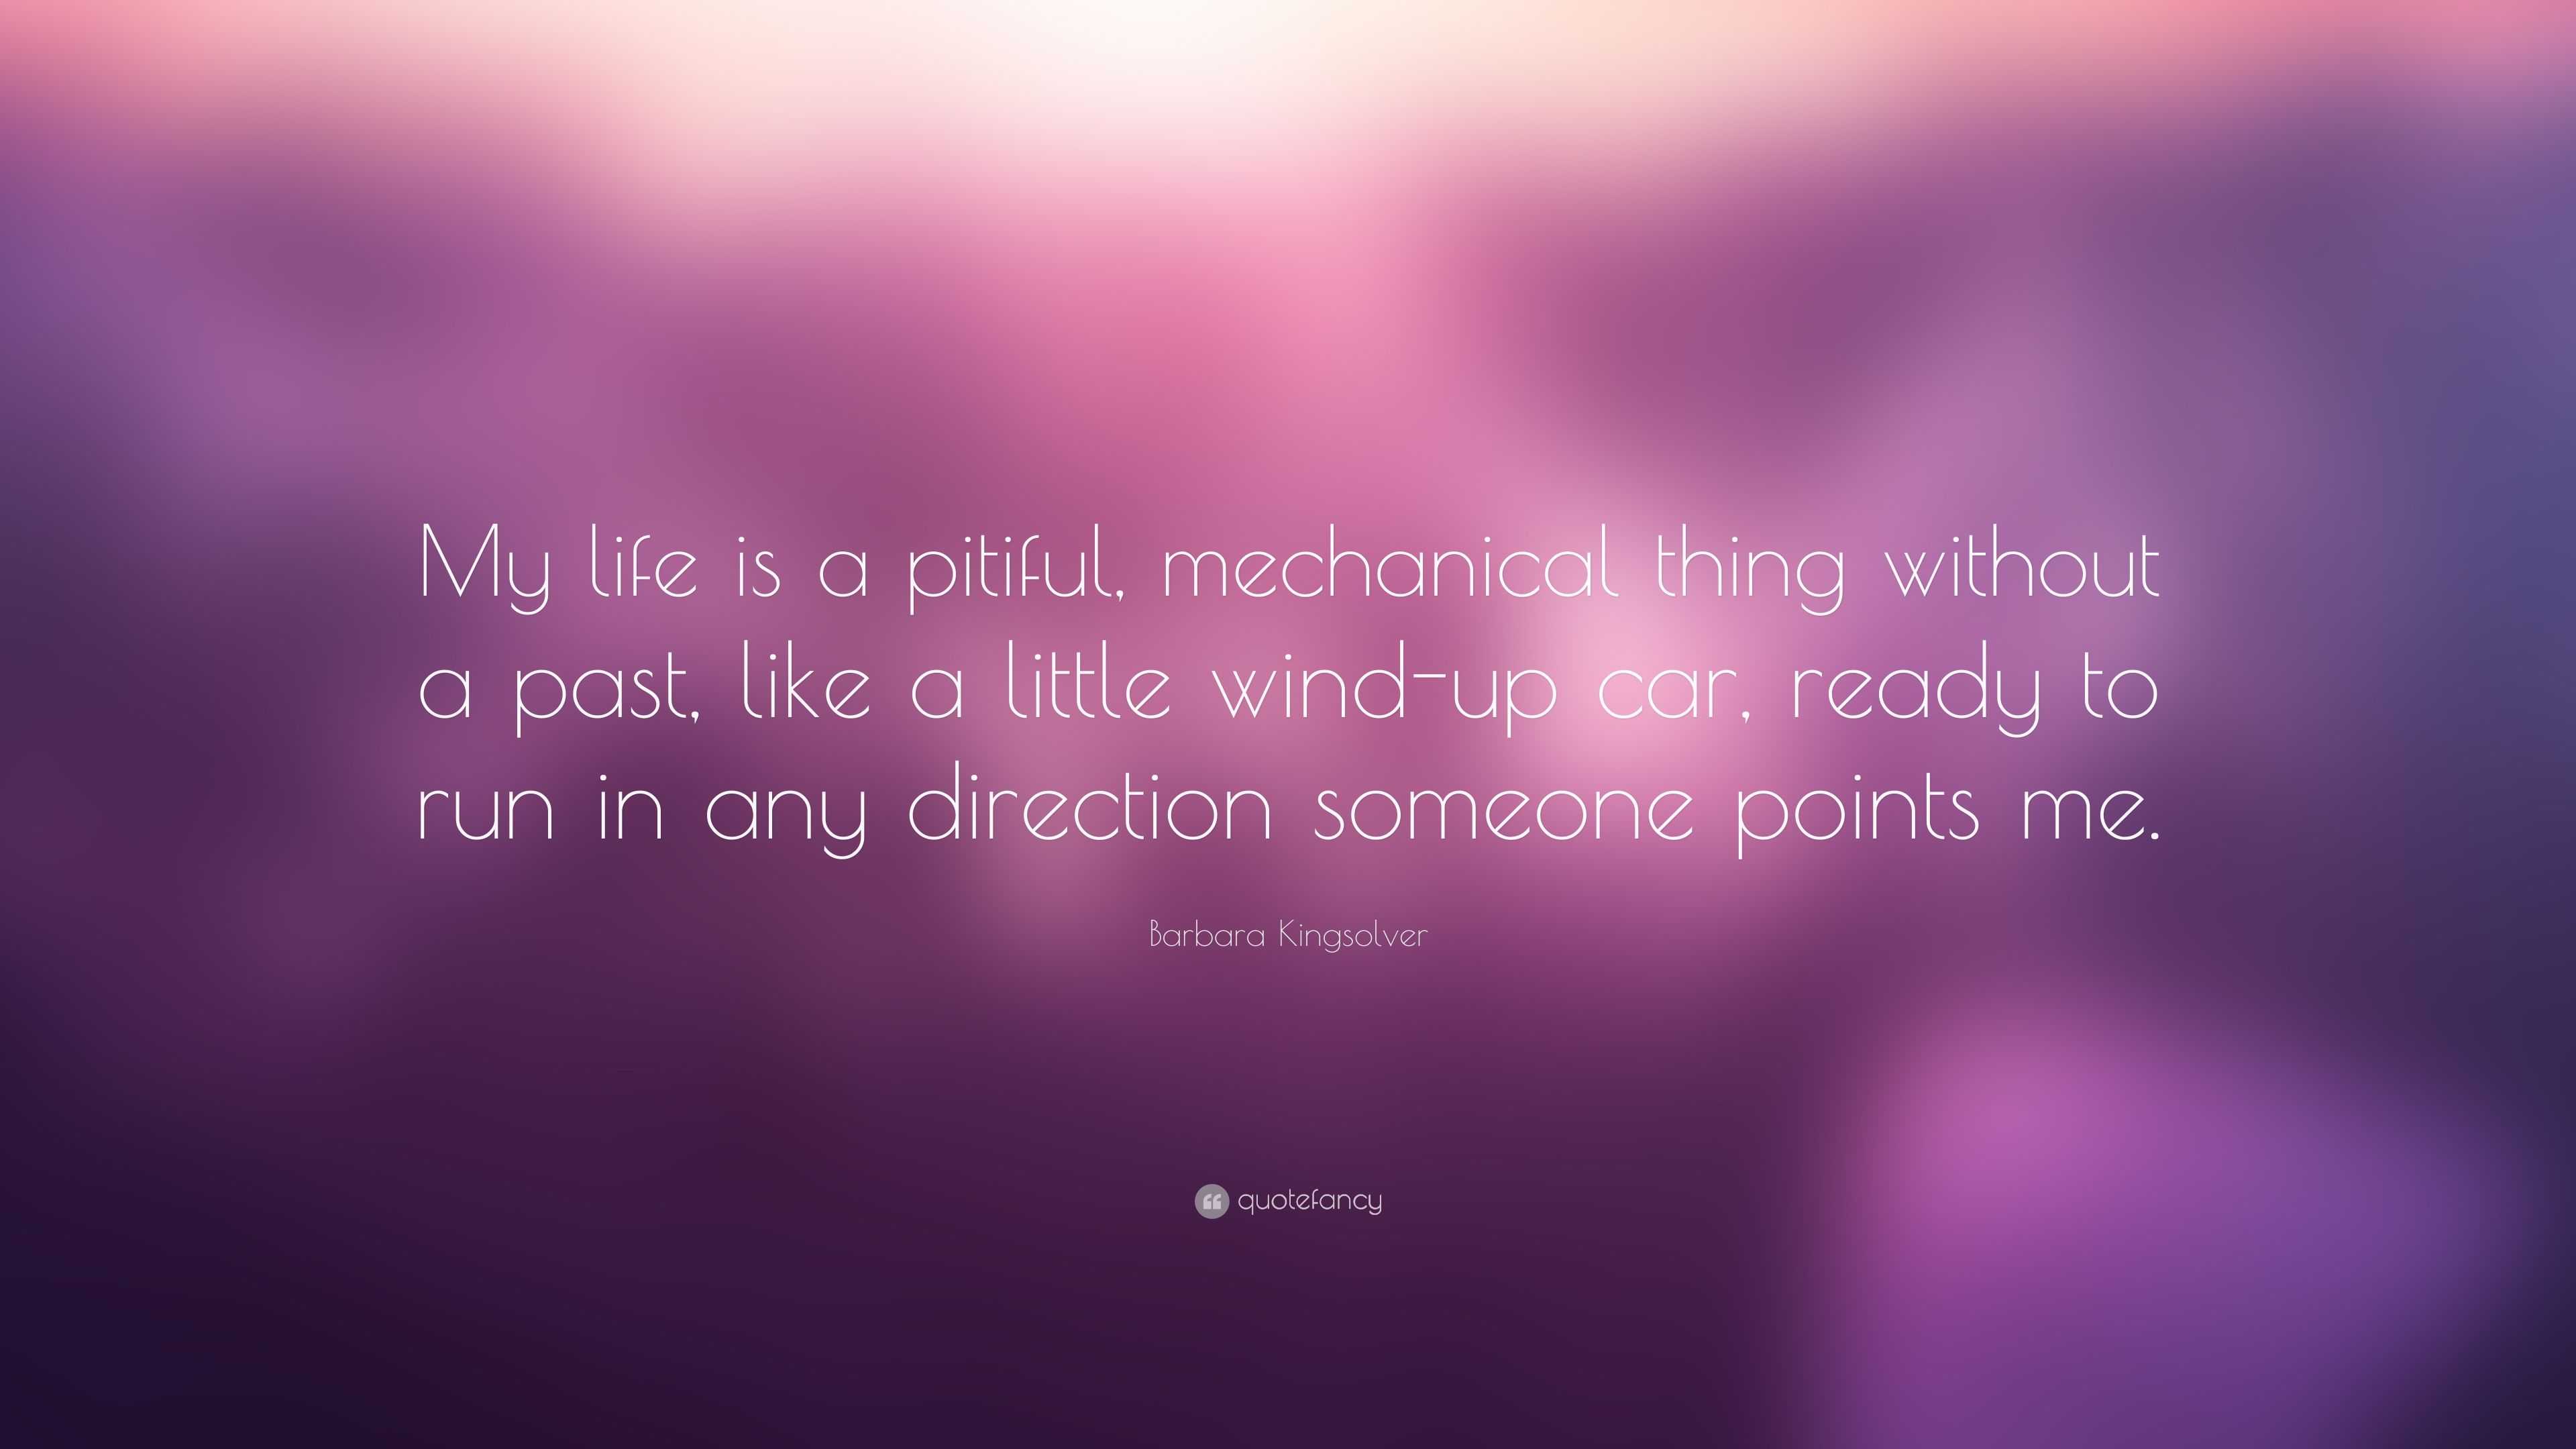 Barbara Kingsolver Quote “My life is a pitiful mechanical thing without a past